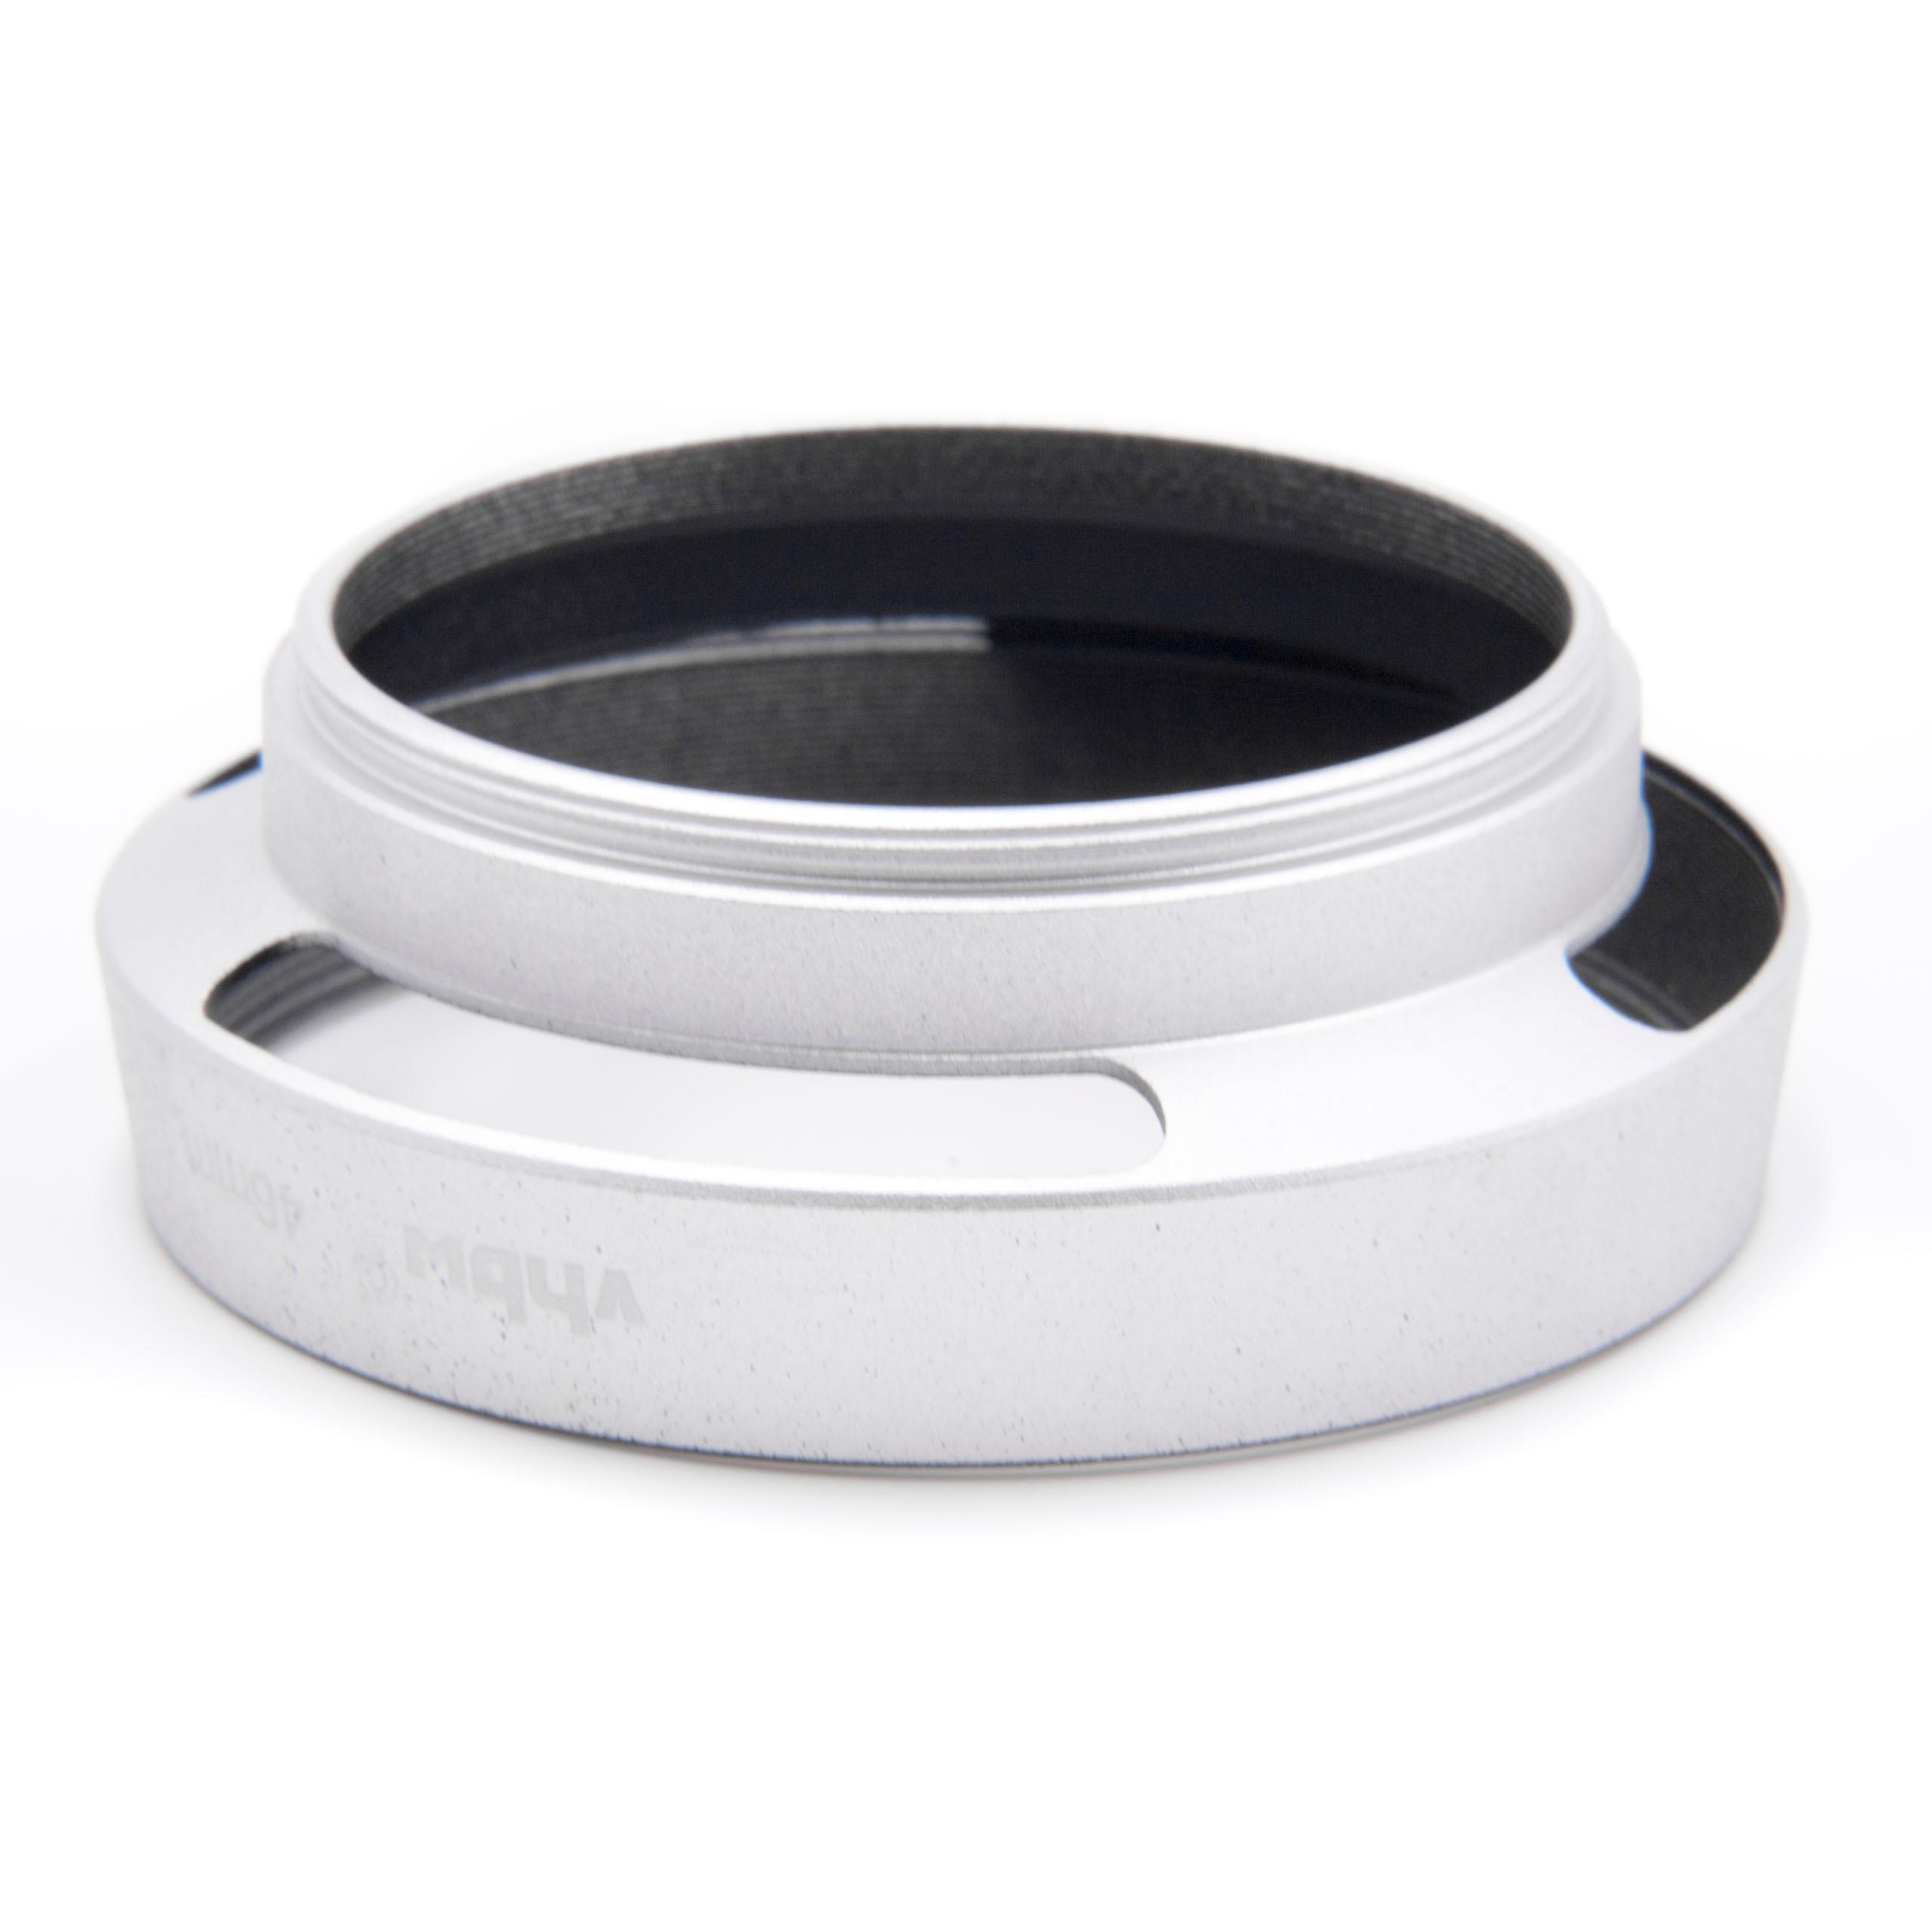 Lens Hood suitable for 46mm Lens - Lens Shade Silver, Round